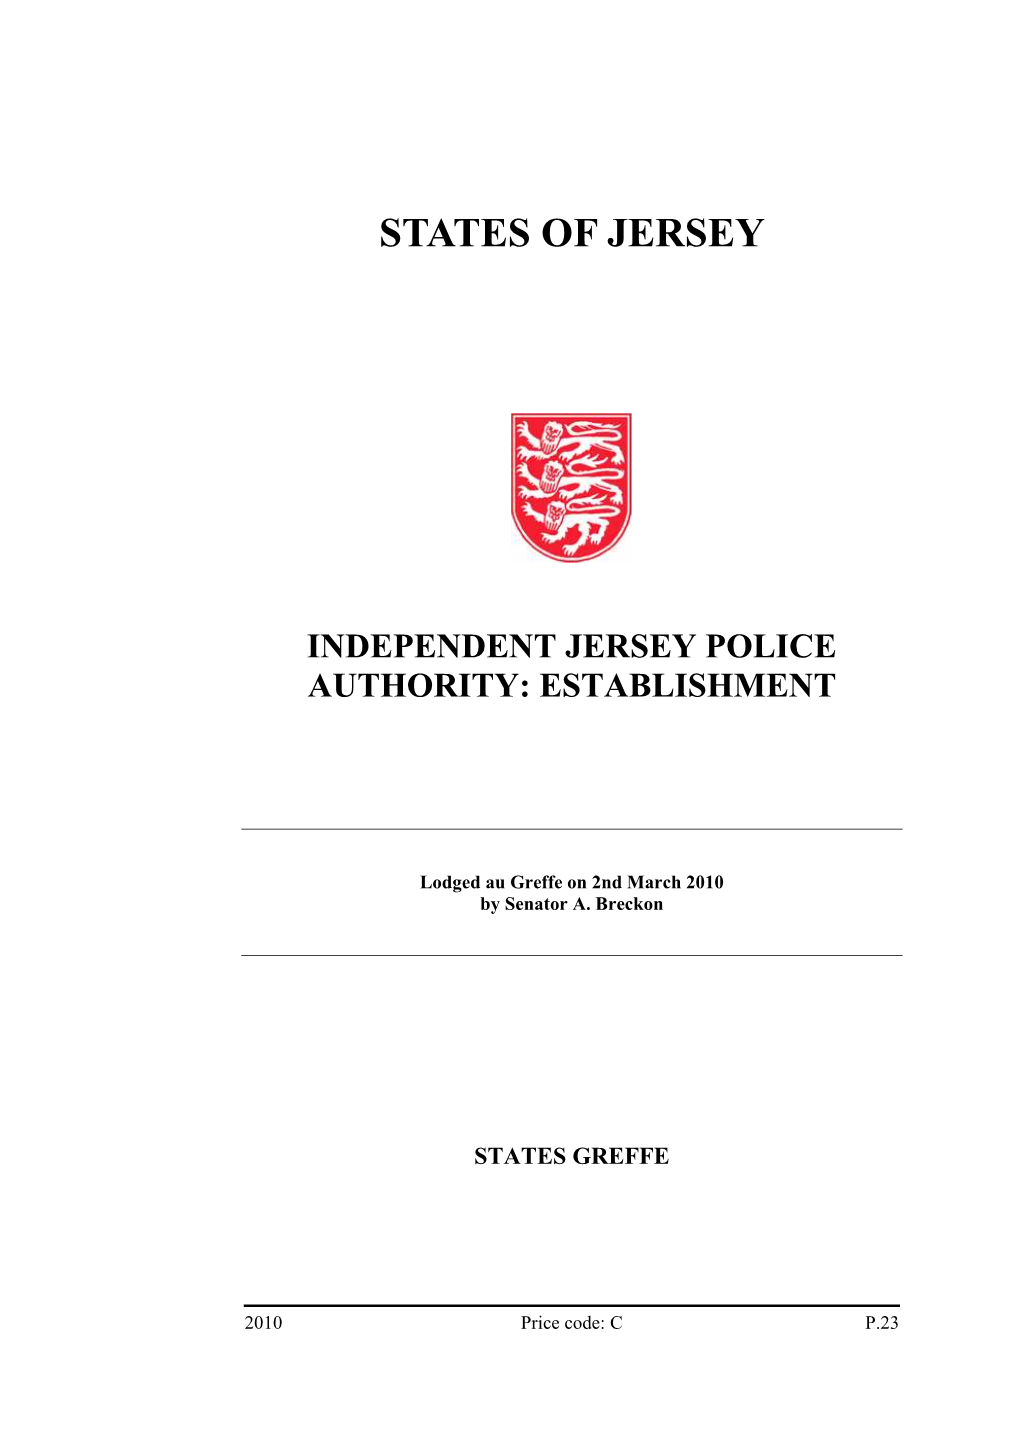 Independent Jersey Police Authority: Establishment